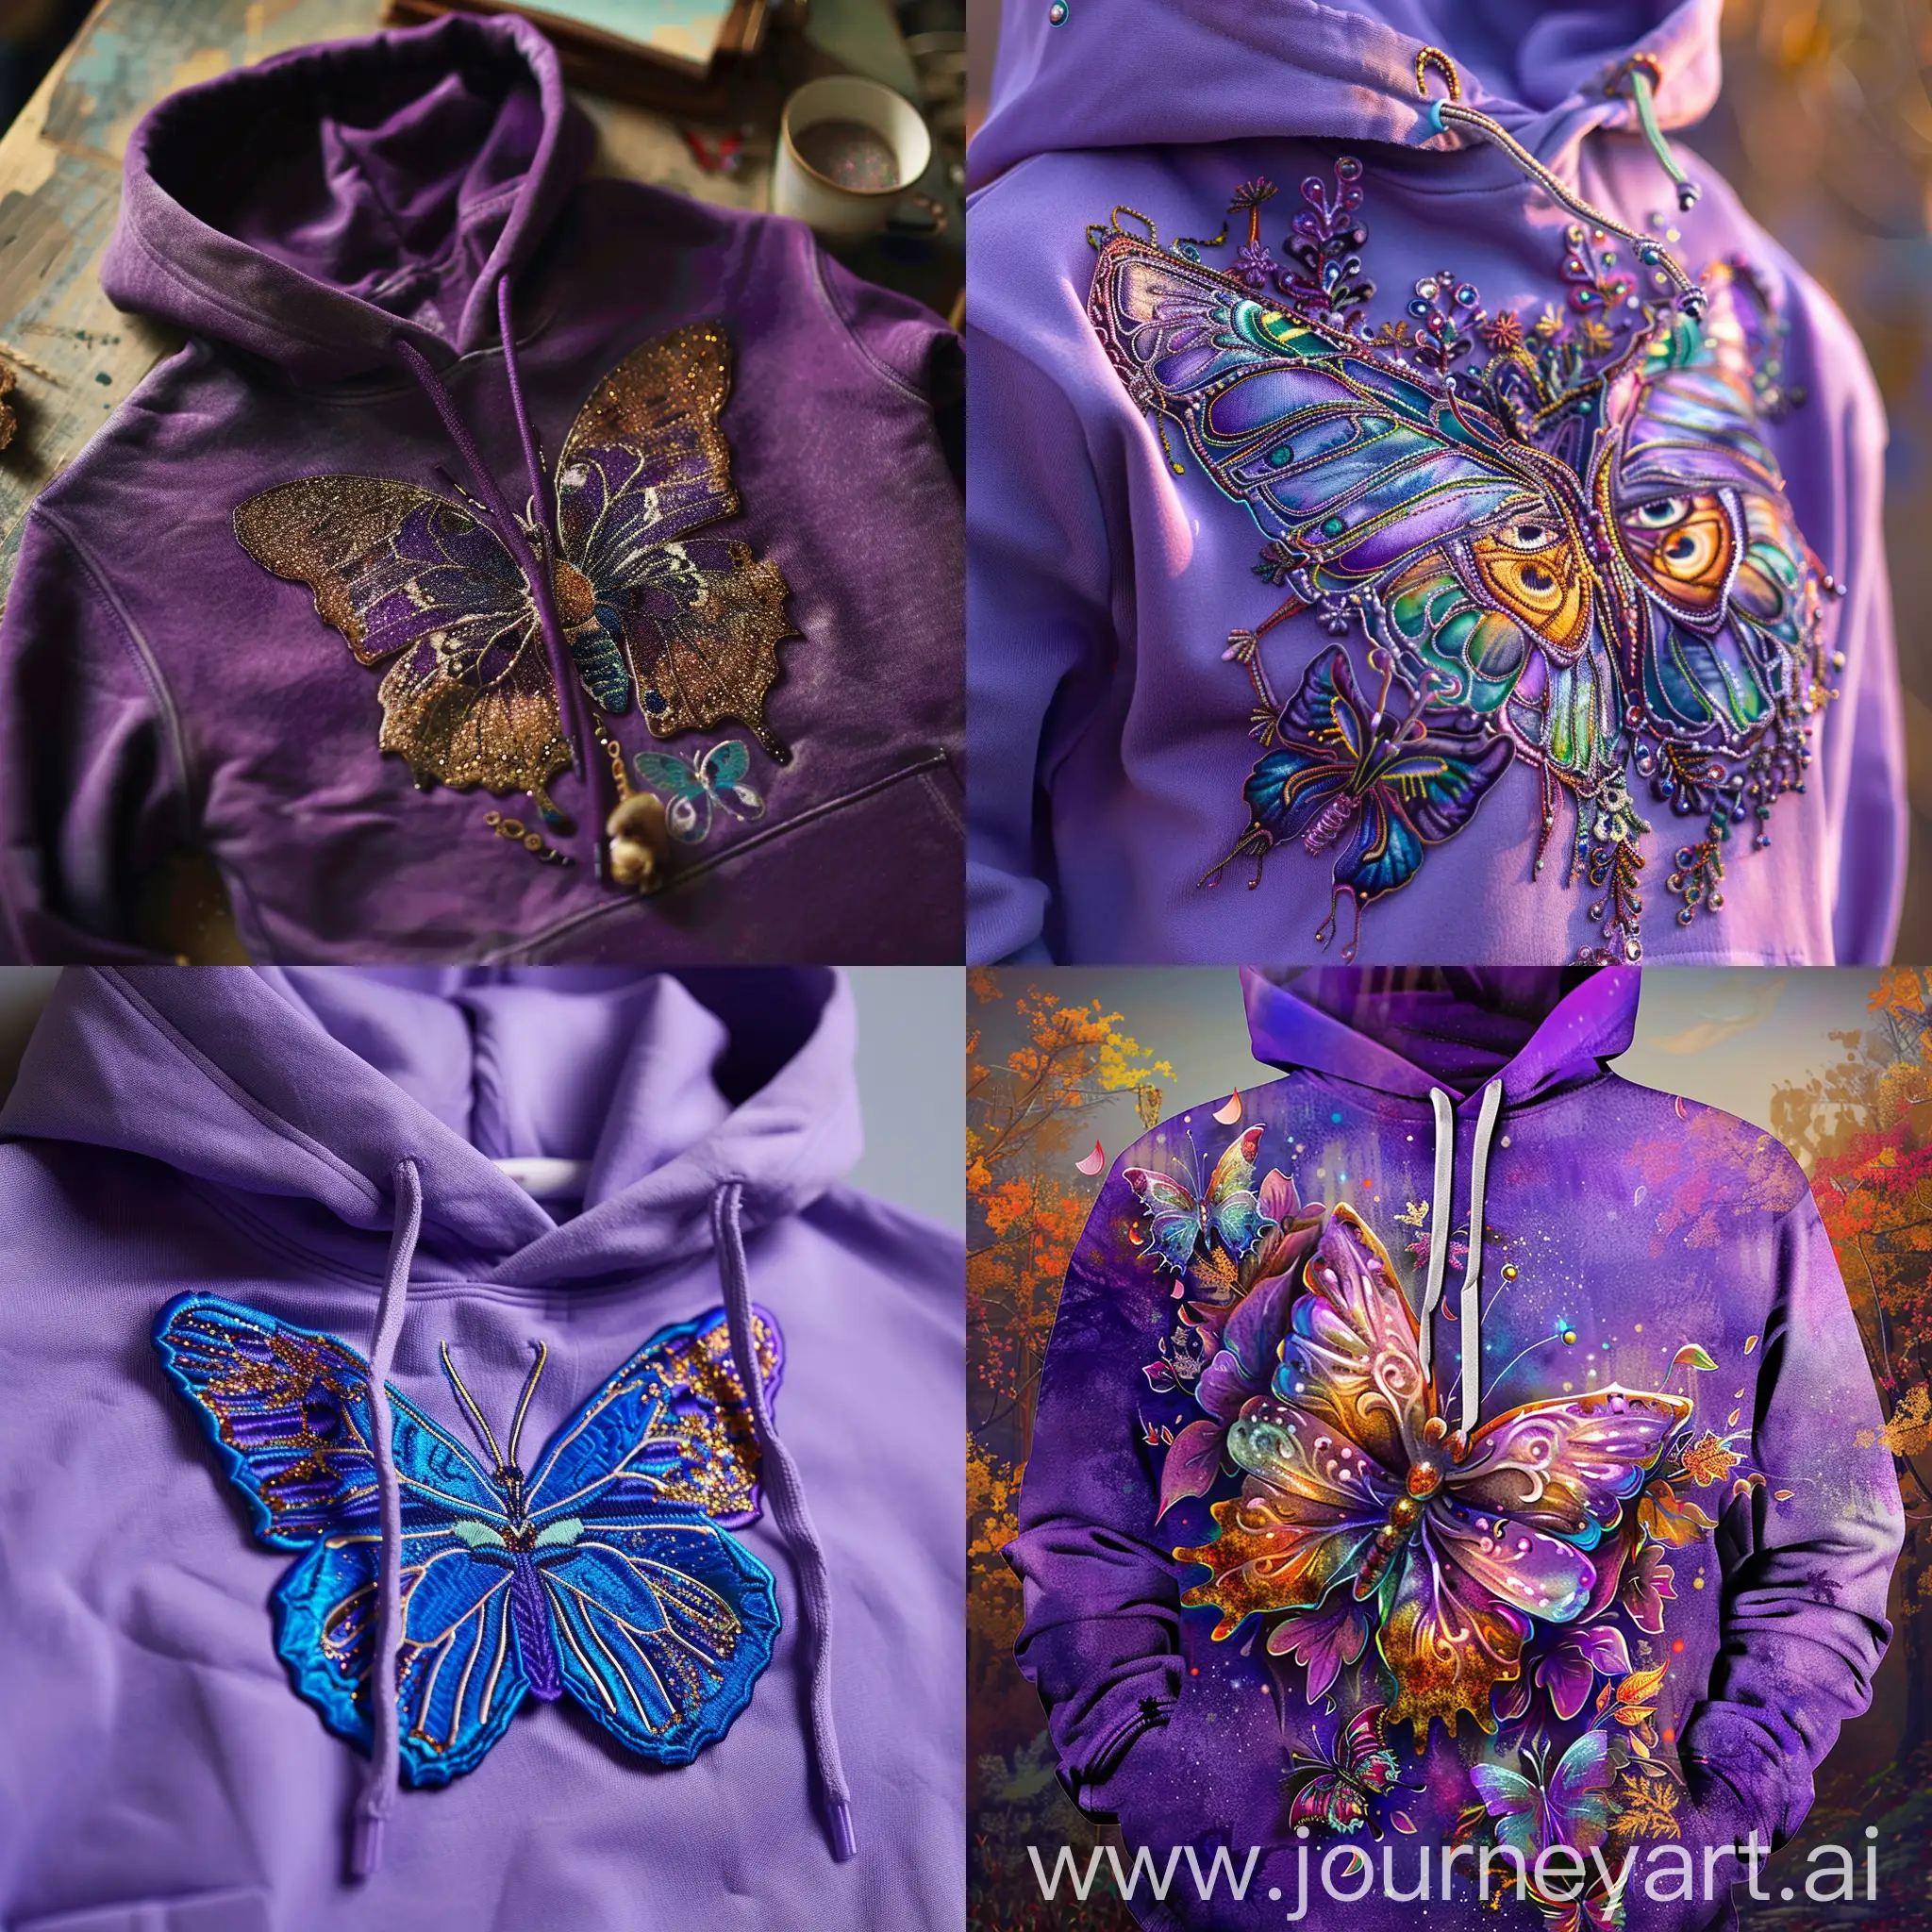 The image shows a purple hoodie with a butterfly design on it. The hoodie appears to be made of a soft, comfortable fabric. The butterfly design is detailed and colorful, adding a stylish and creative touch to the garment. The image may also include additional details such as the texture of the hoodie fabric, the presence of any embellishments or patterns, and the overall style of the garment.